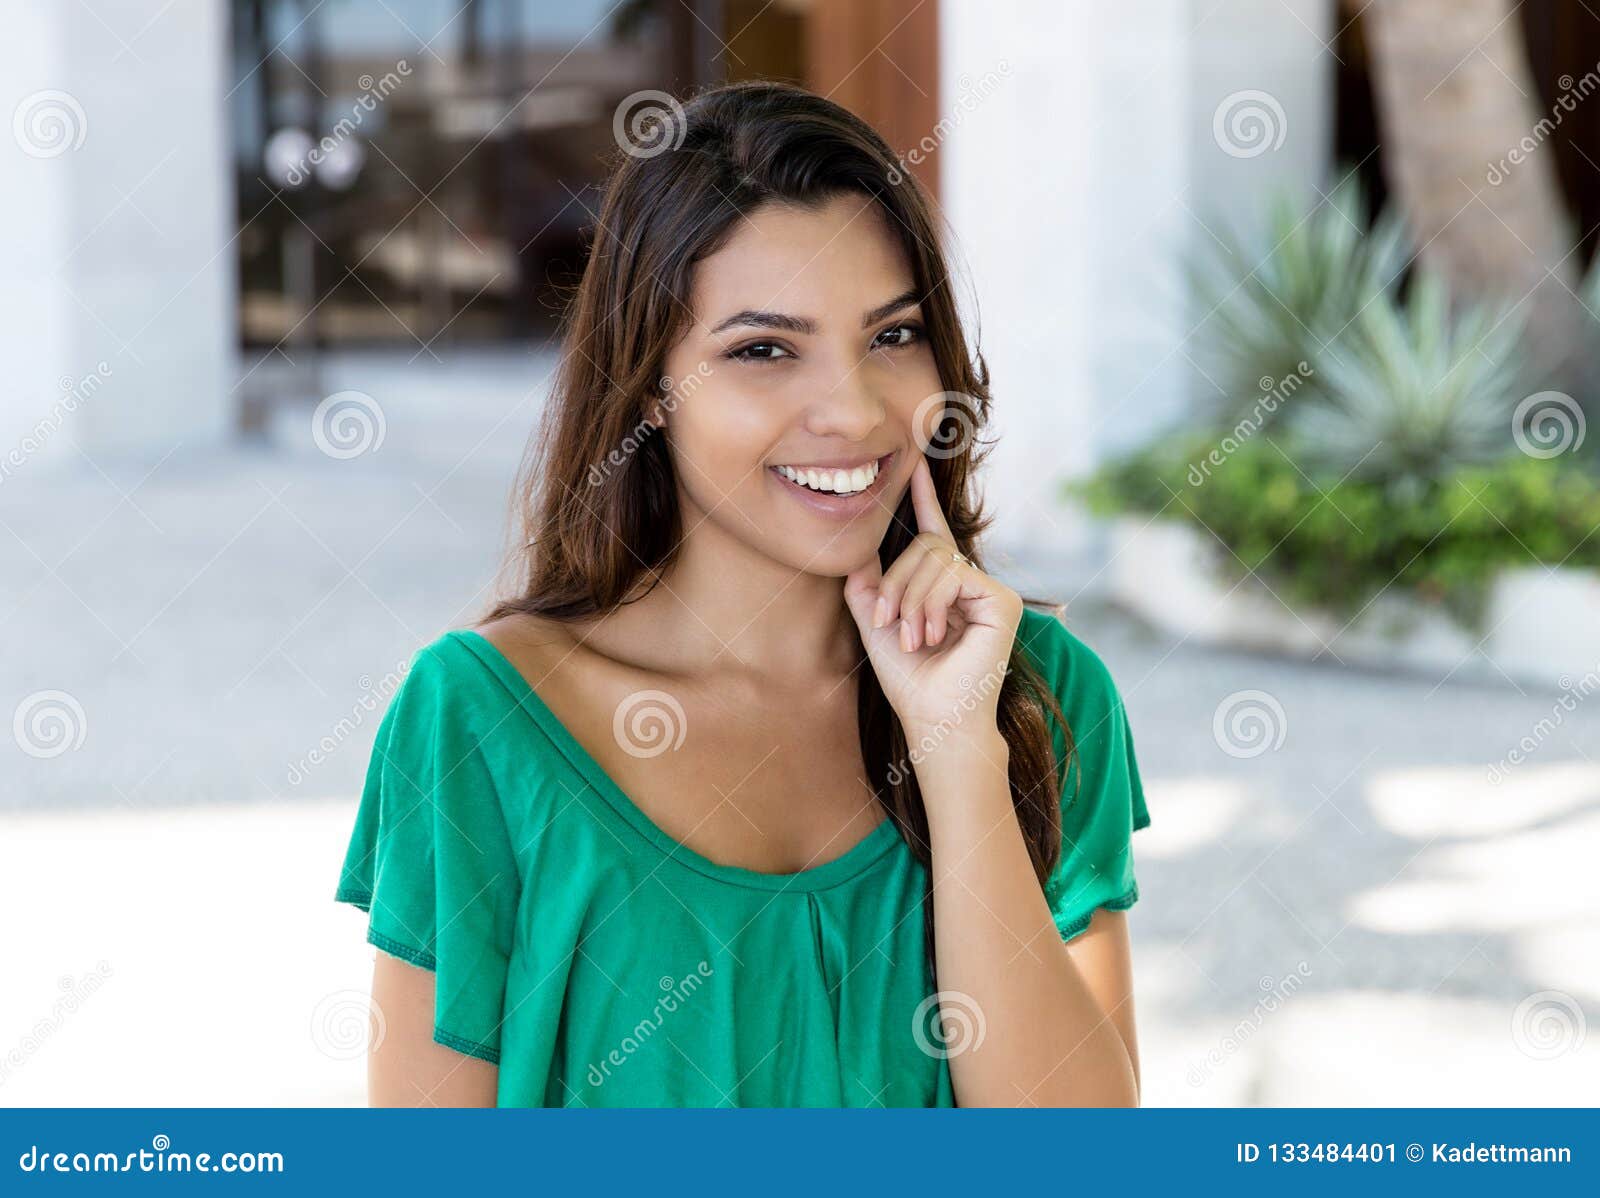 https://thumbs.dreamstime.com/z/attractive-latin-american-young-adult-woman-green-shirt-attractive-latin-american-young-adult-woman-green-shirt-summer-133484401.jpg